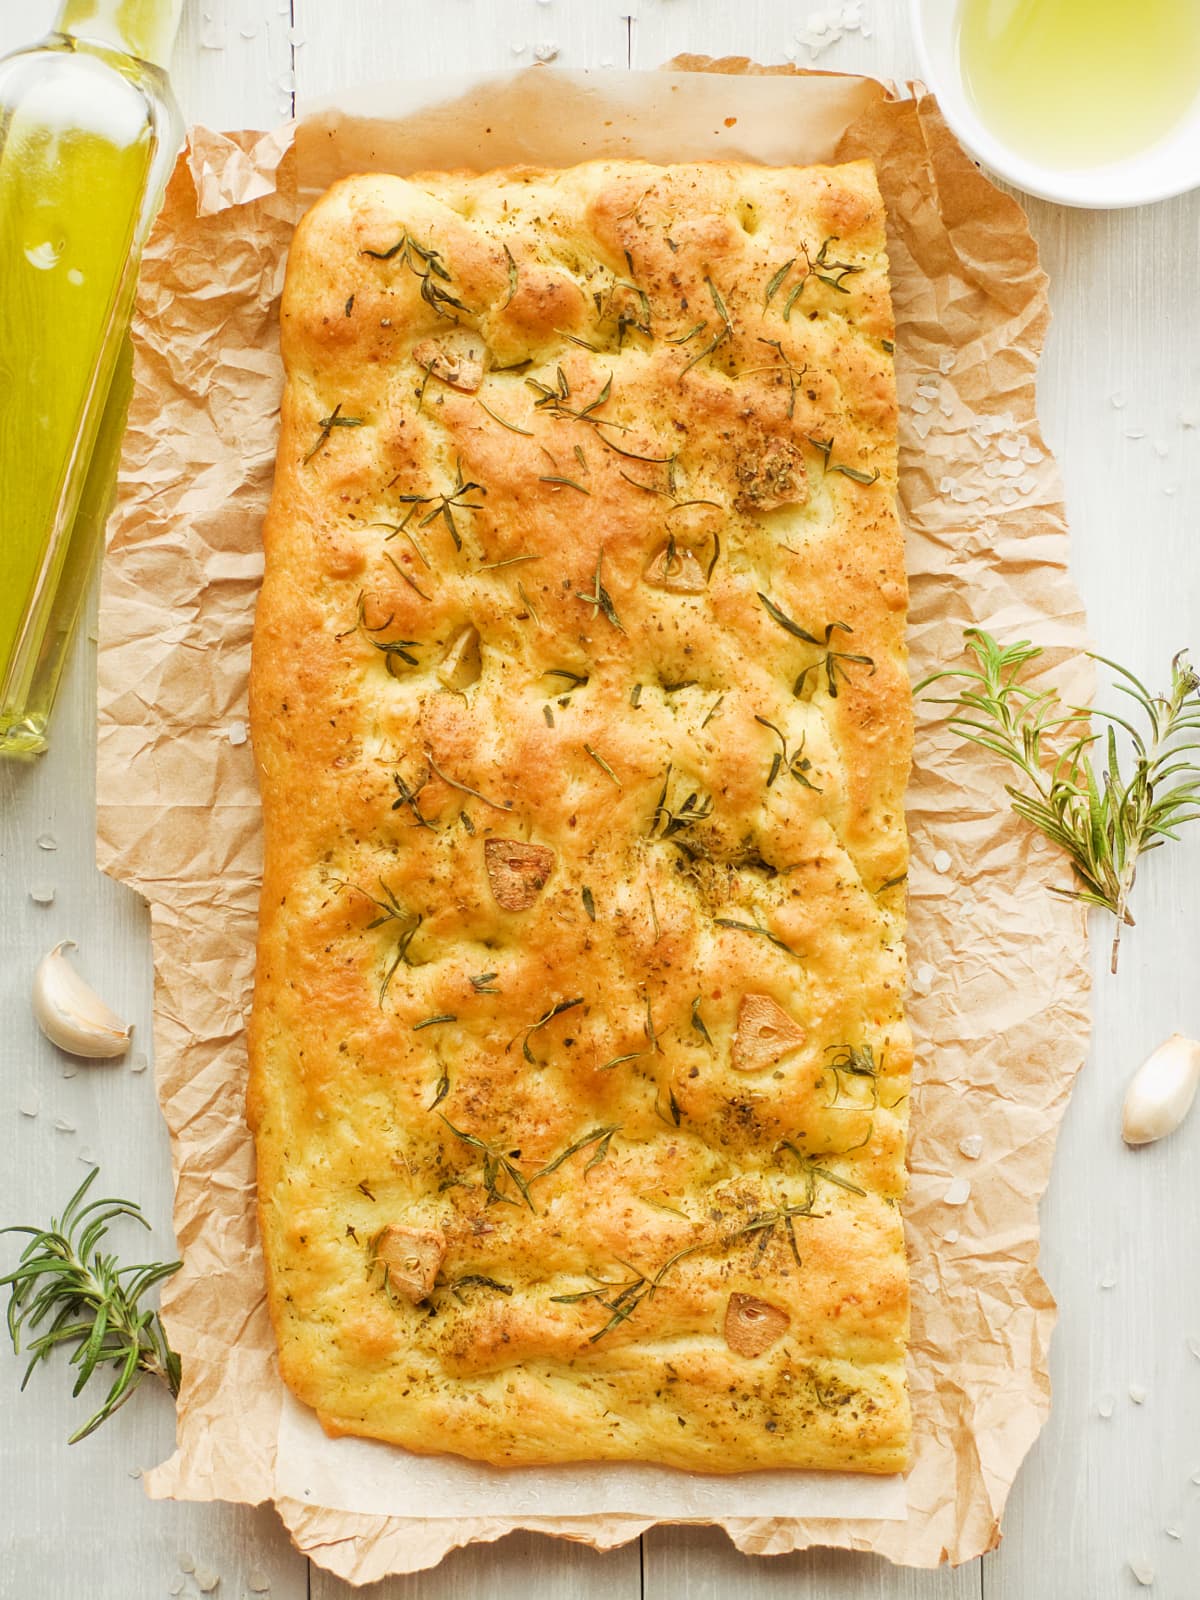 Italian focaccia bread with rosemary, garlic, cherry tomatoes and olive oil. Shallow dof.